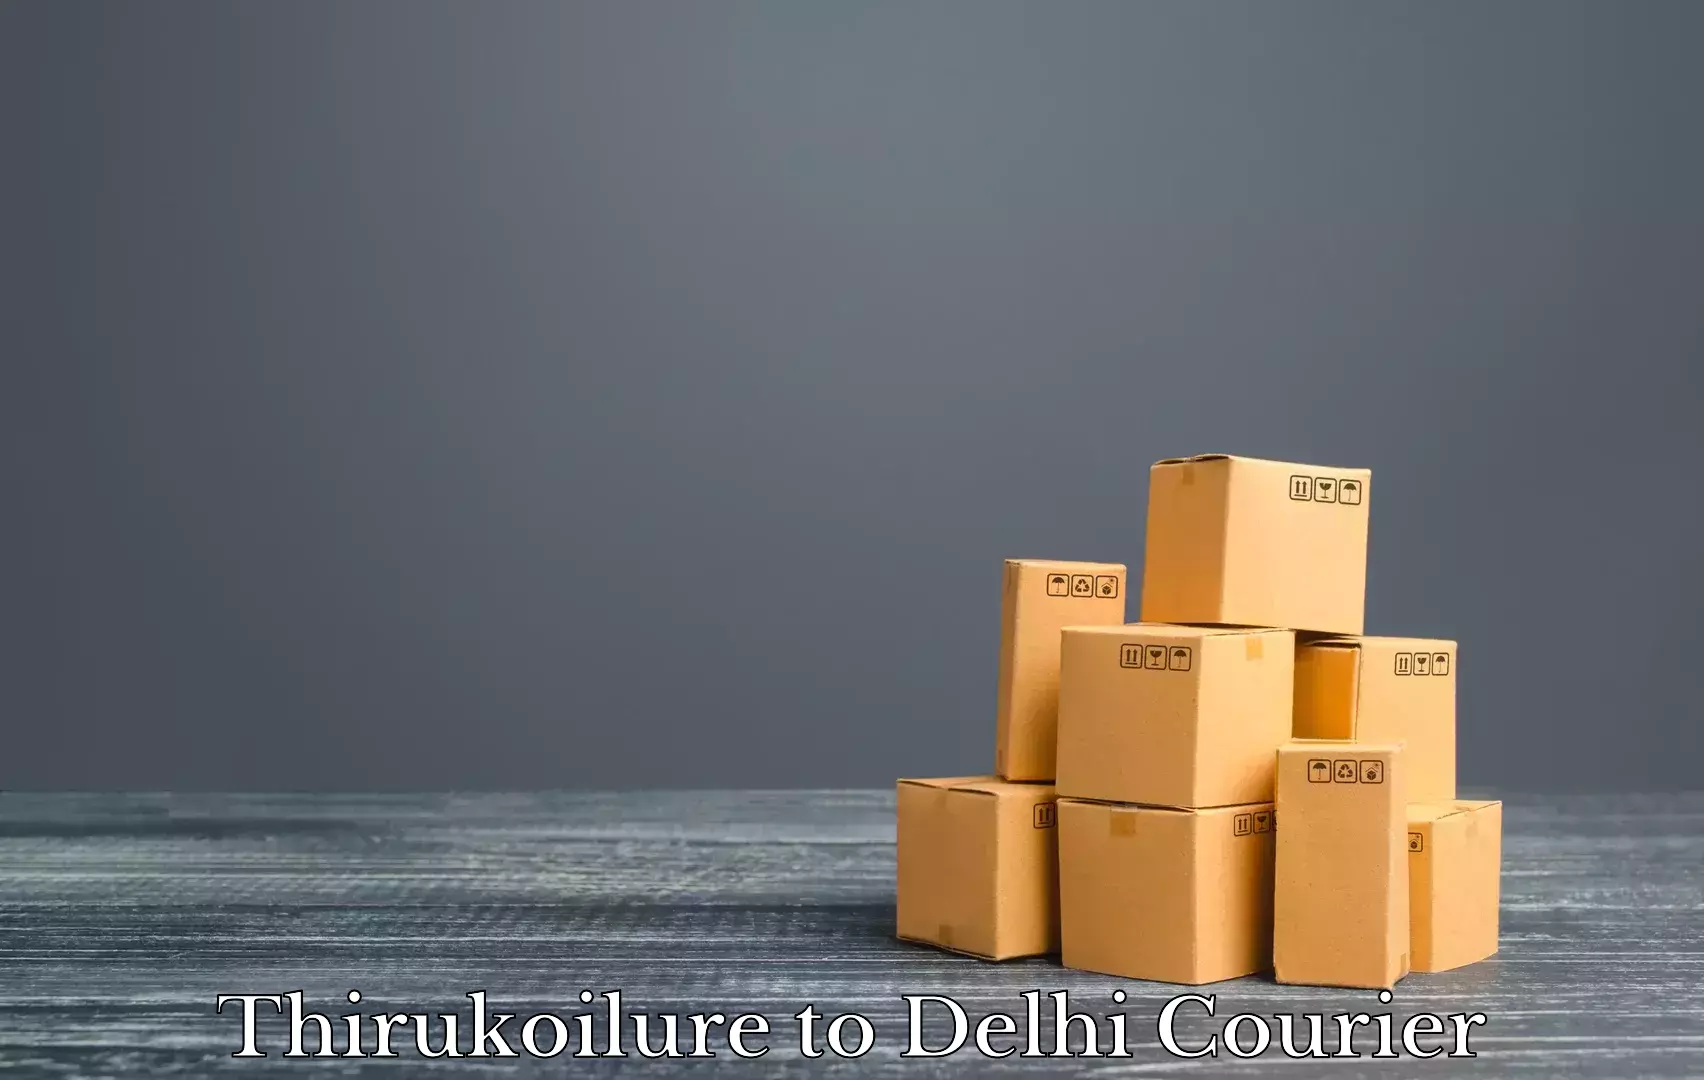 Trusted moving company Thirukoilure to Delhi